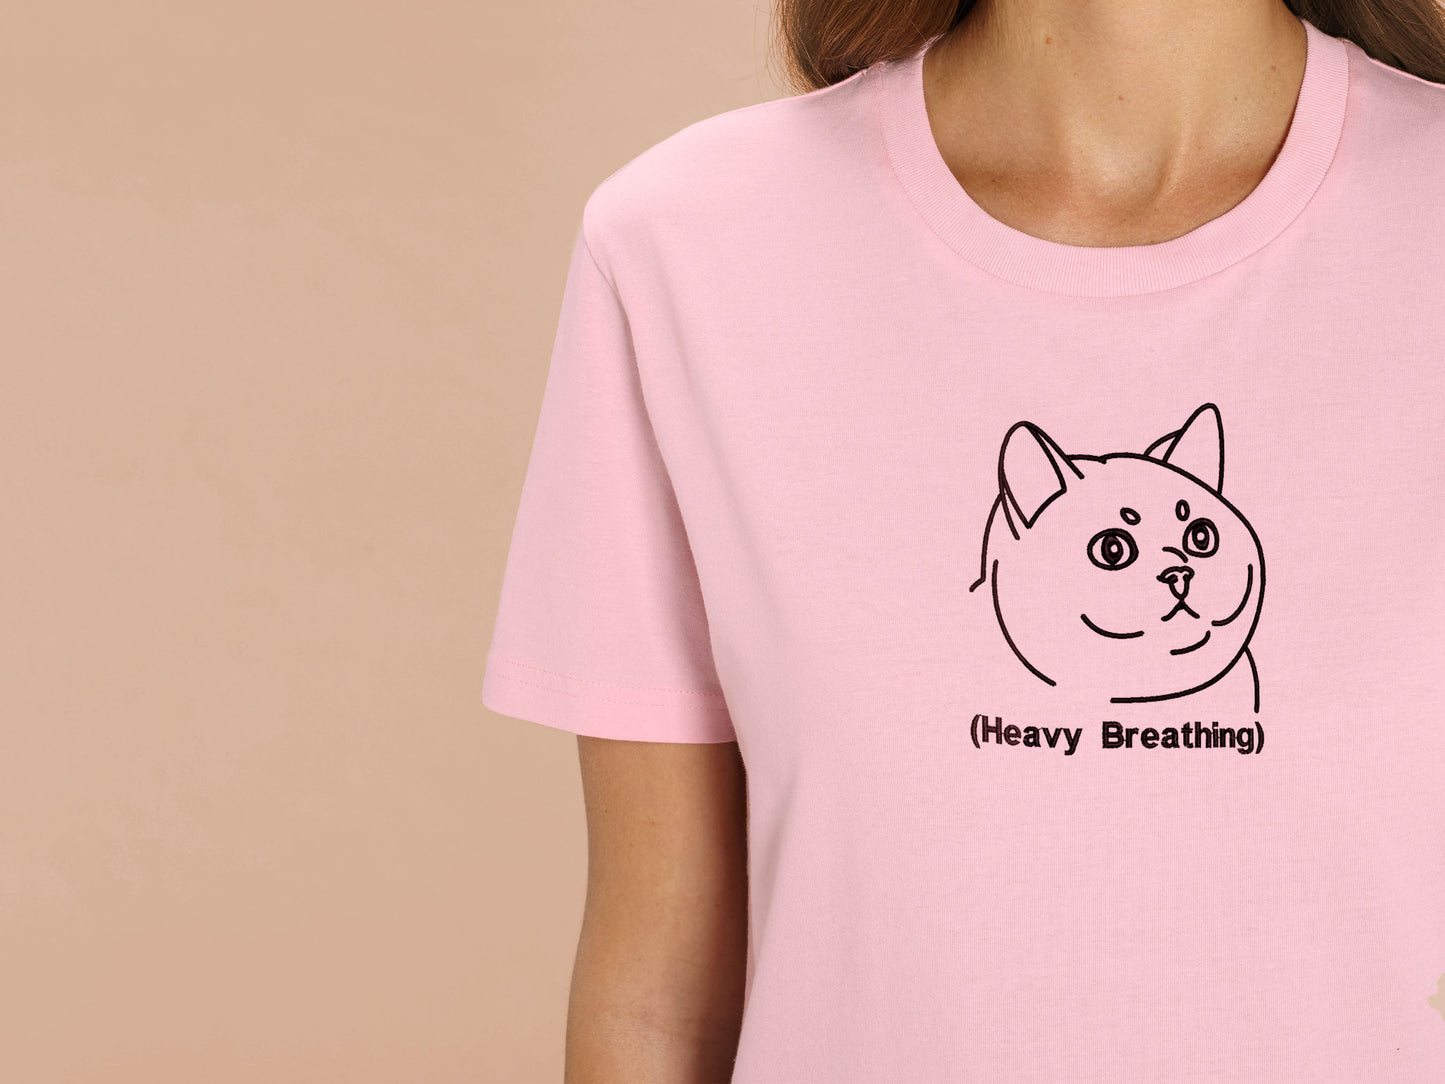 A woman wearing a pink crew neck short sleeve t-shirt, with an embroidered brown thread design of cute fat cat portrait with text underneath saying (Heavy Breathing)